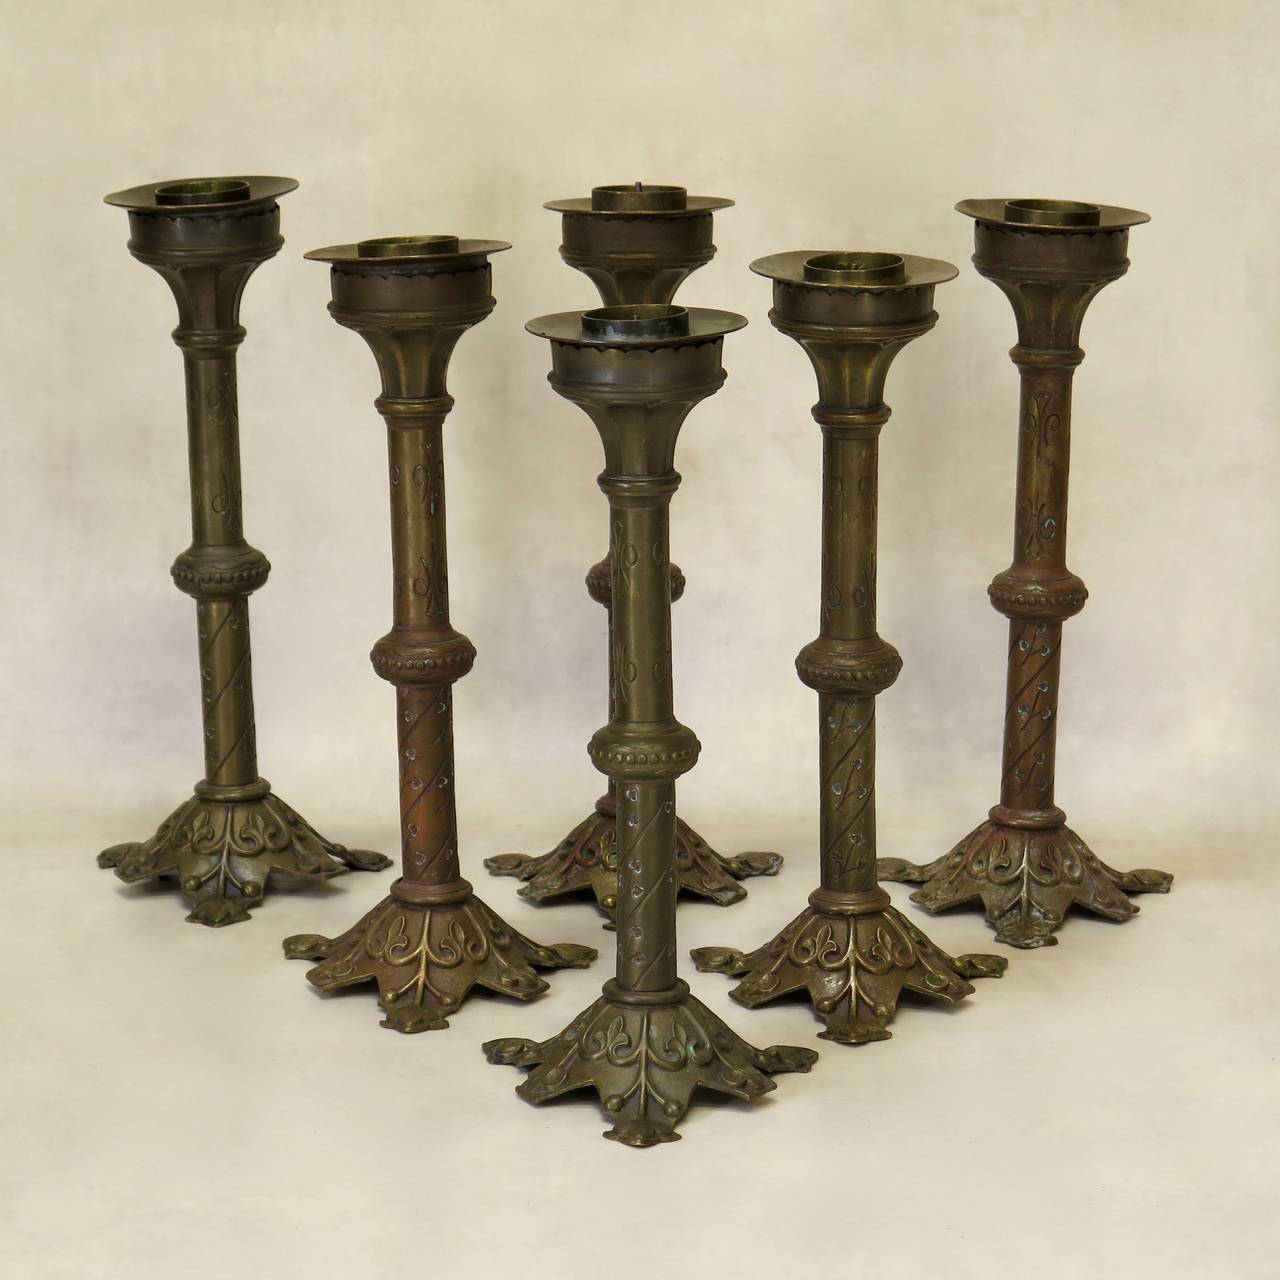 Handsome set of six large brass candle holders of Medieval style.